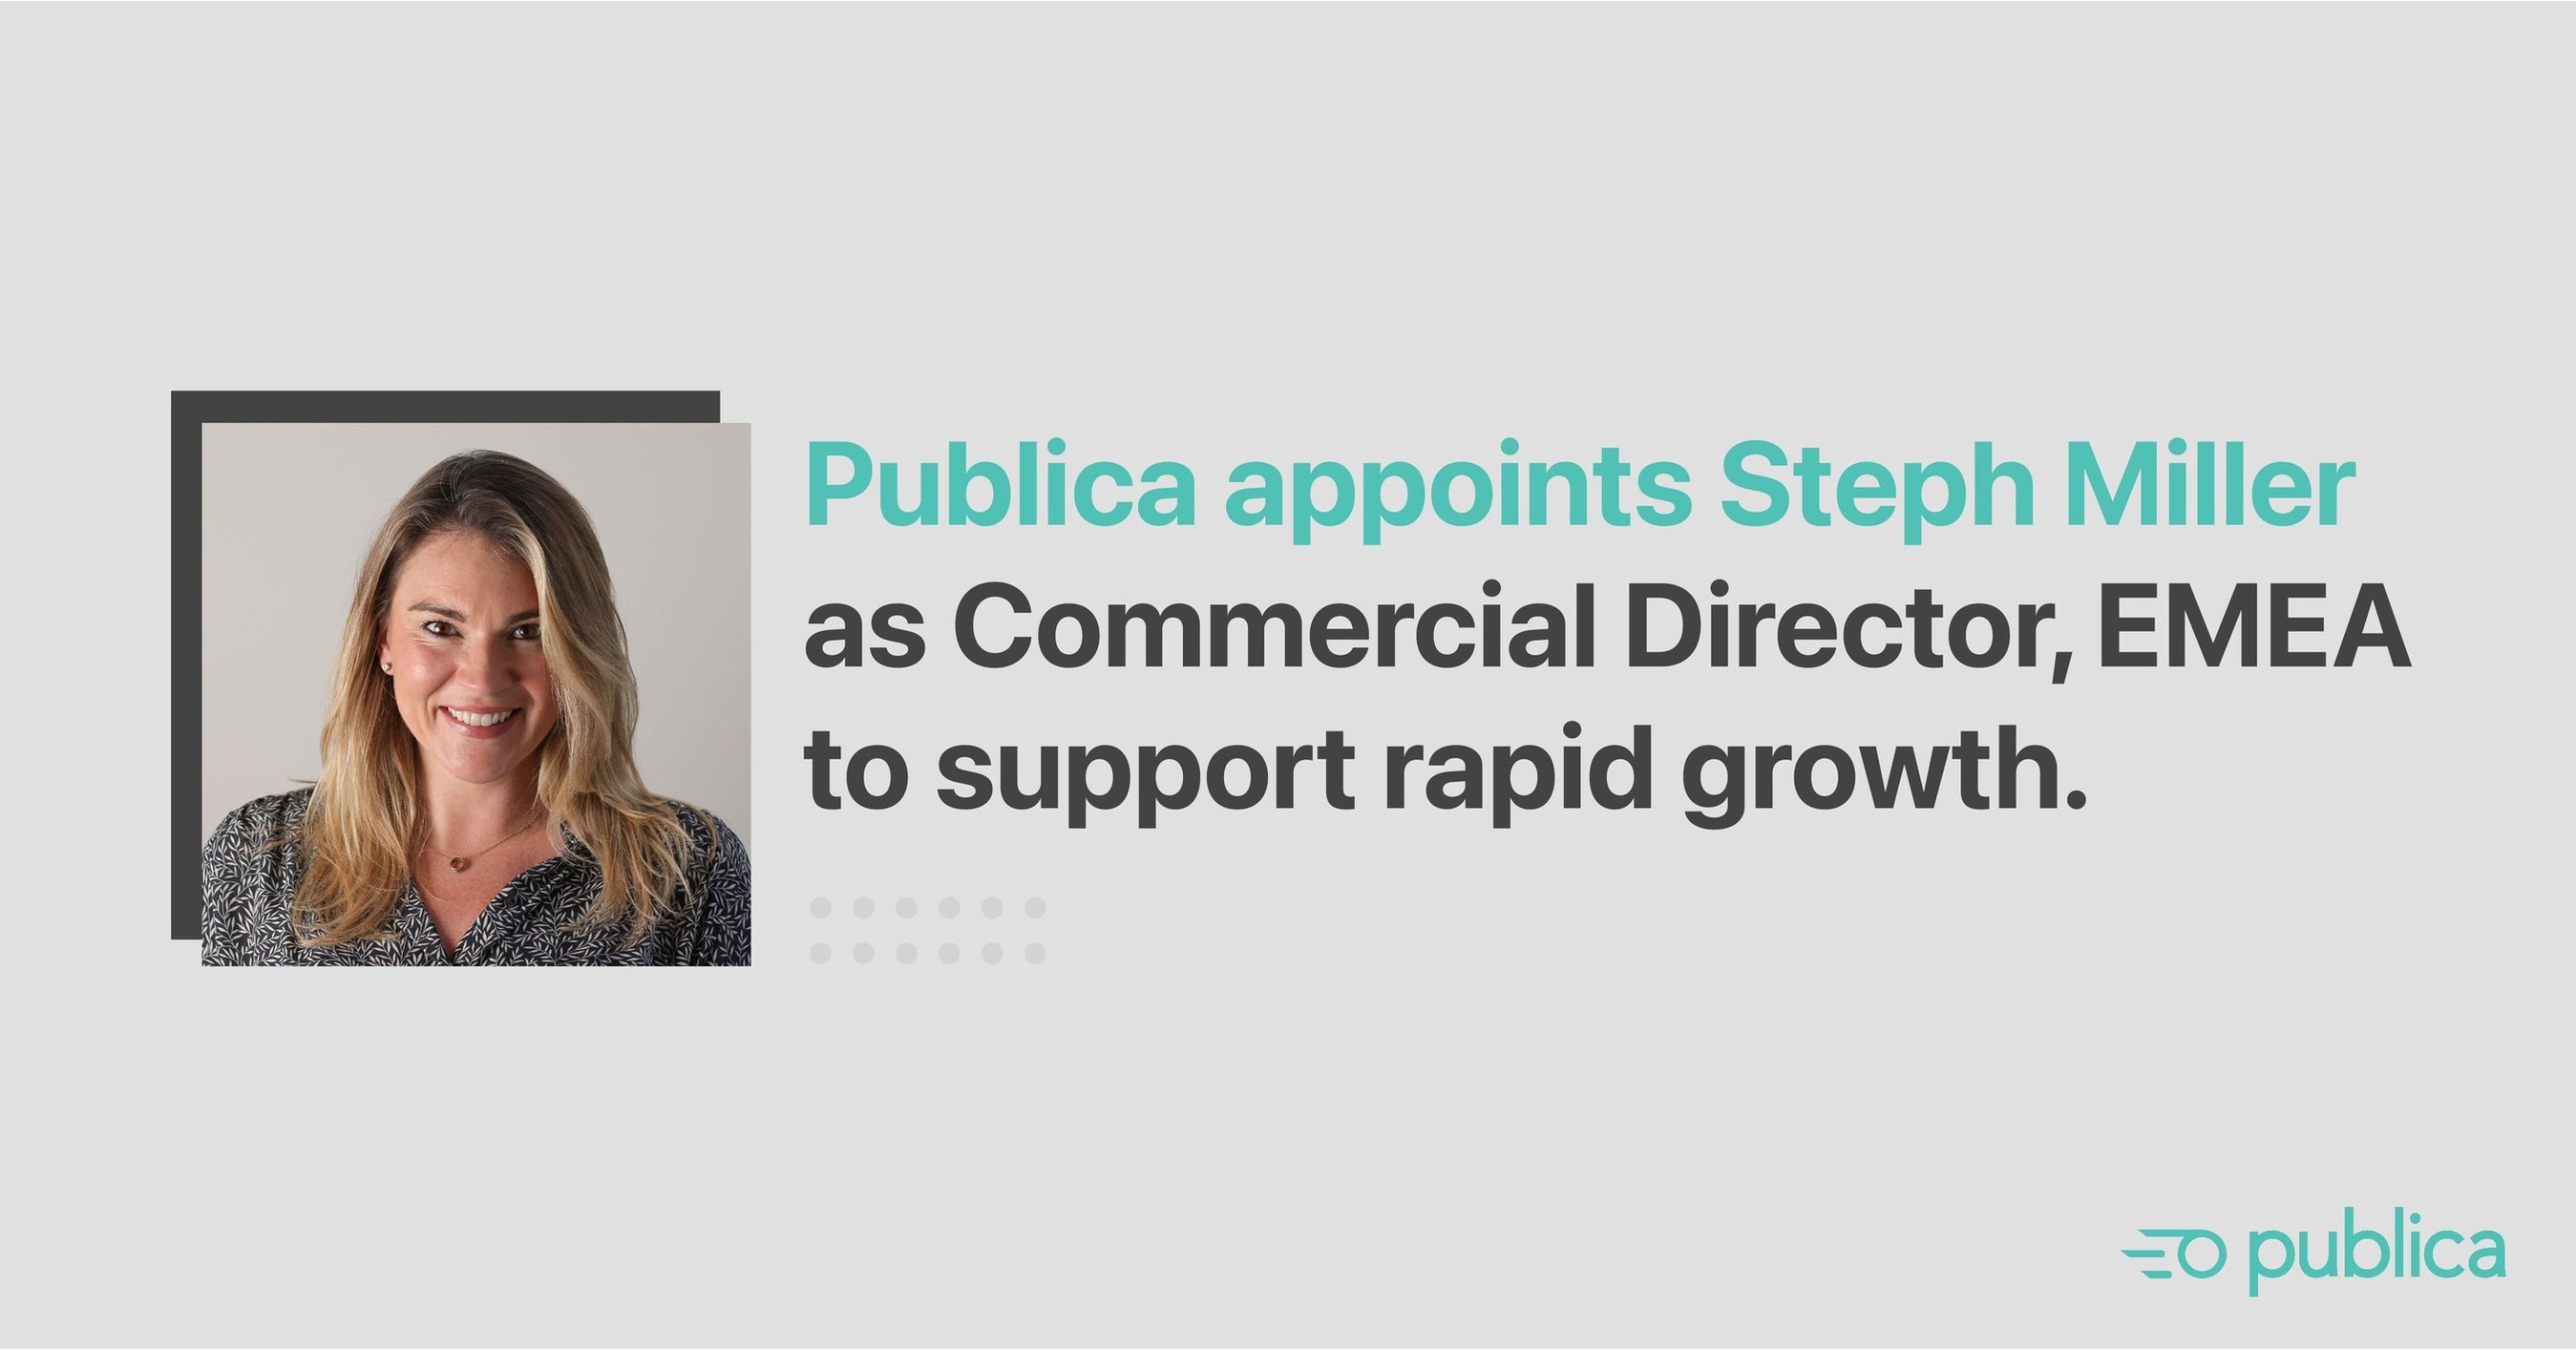 Publica Appoints Steph Miller as Commercial Director EMEA to Support Rapid Growth